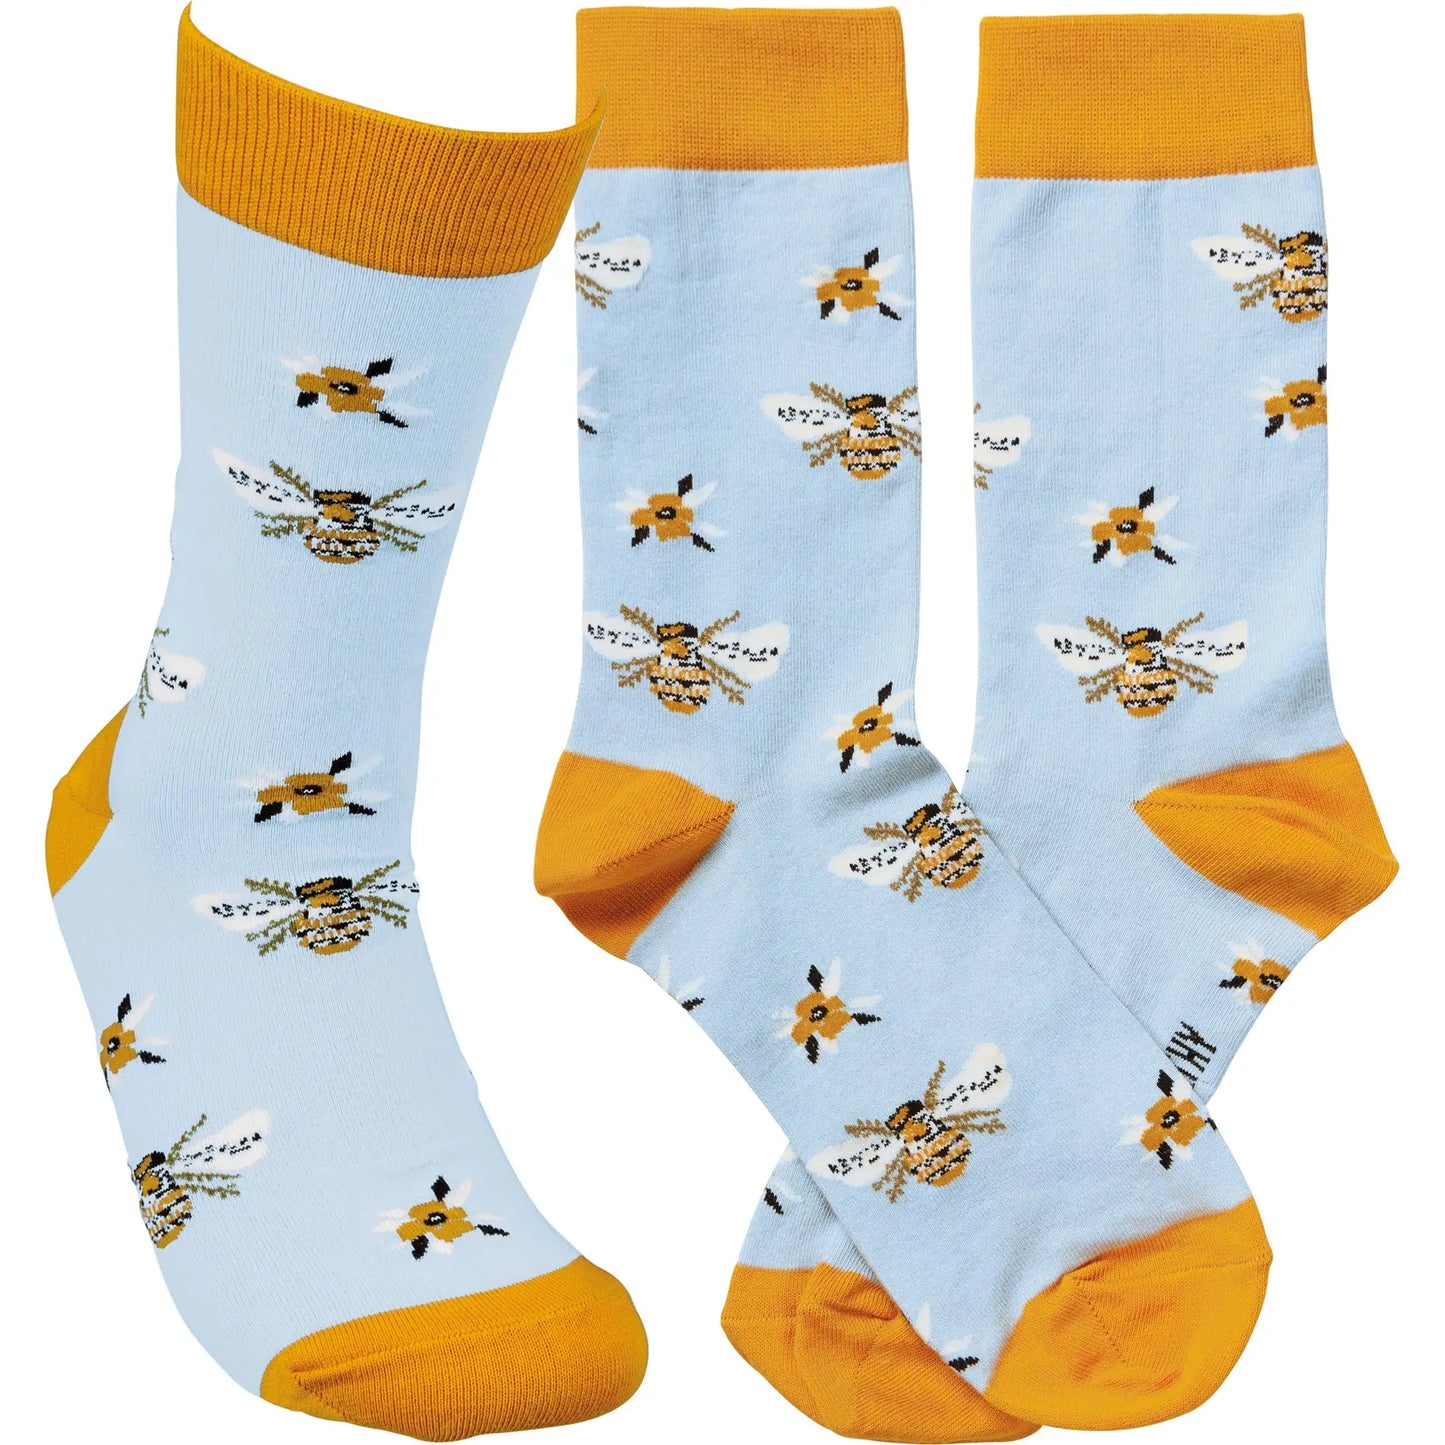 Primitives By Kathy - "Bee" Socks PRIMITIVES BY KATHY